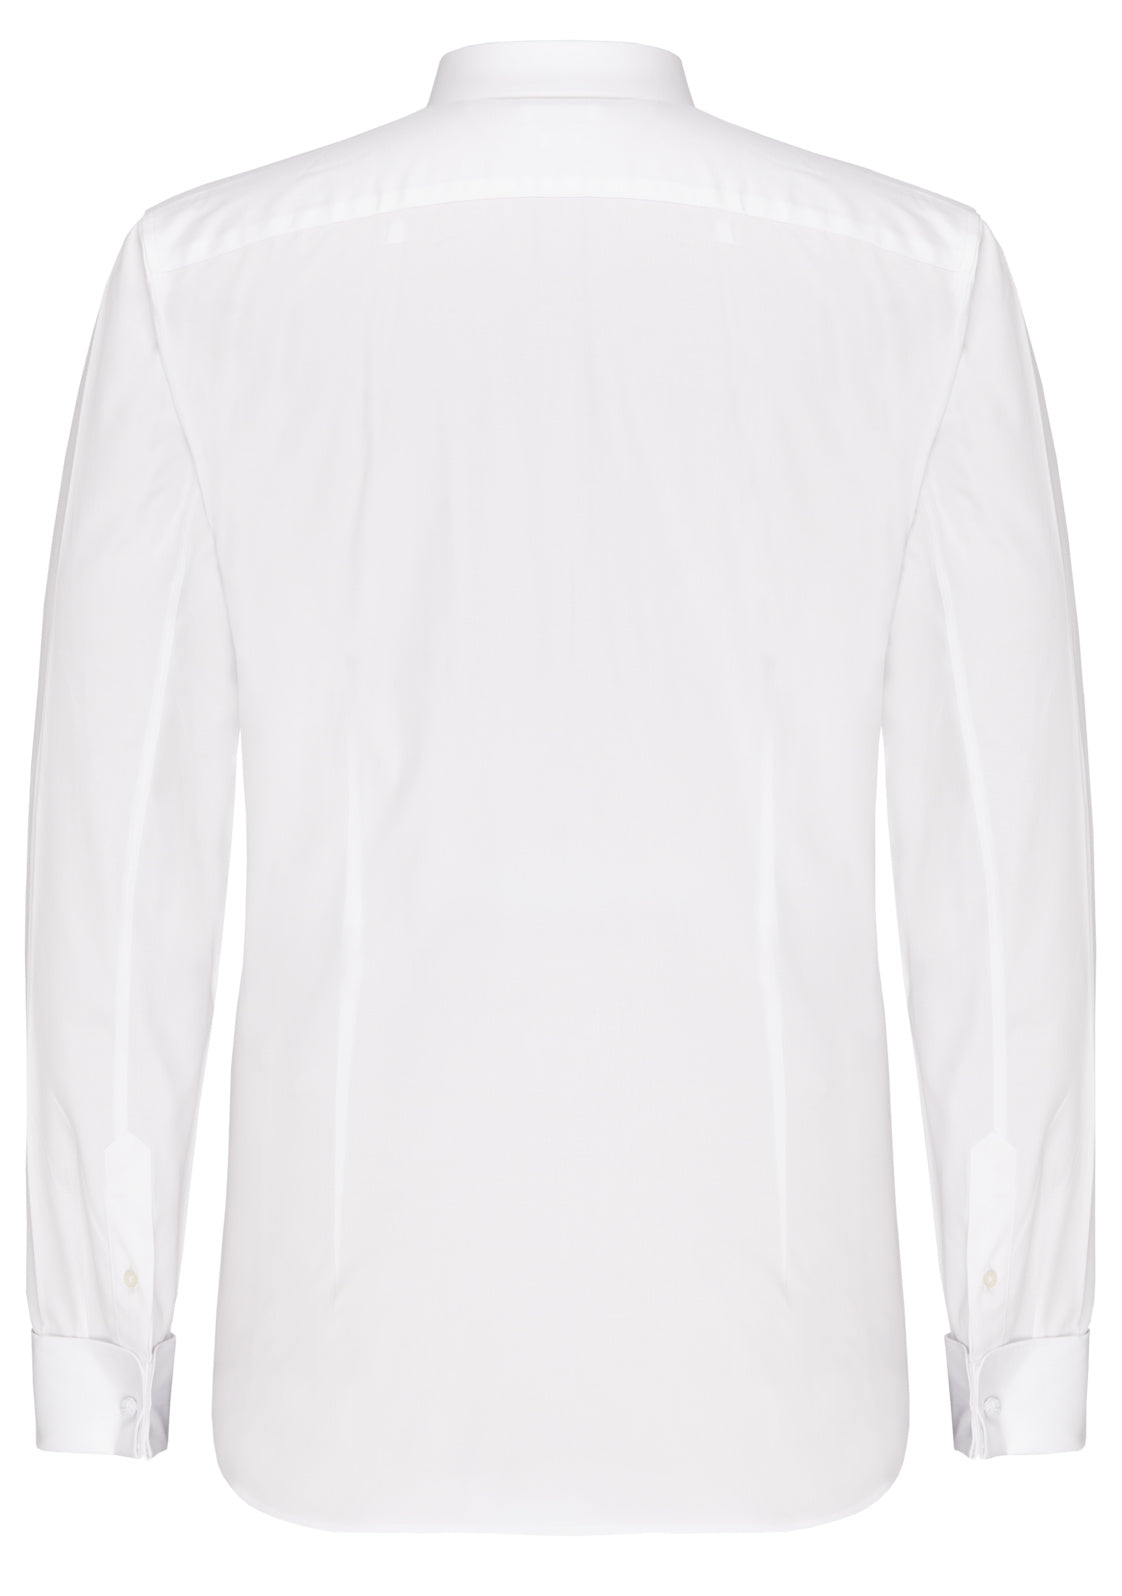 CLUB of GENTS Your Own Party by CG Shirt, White